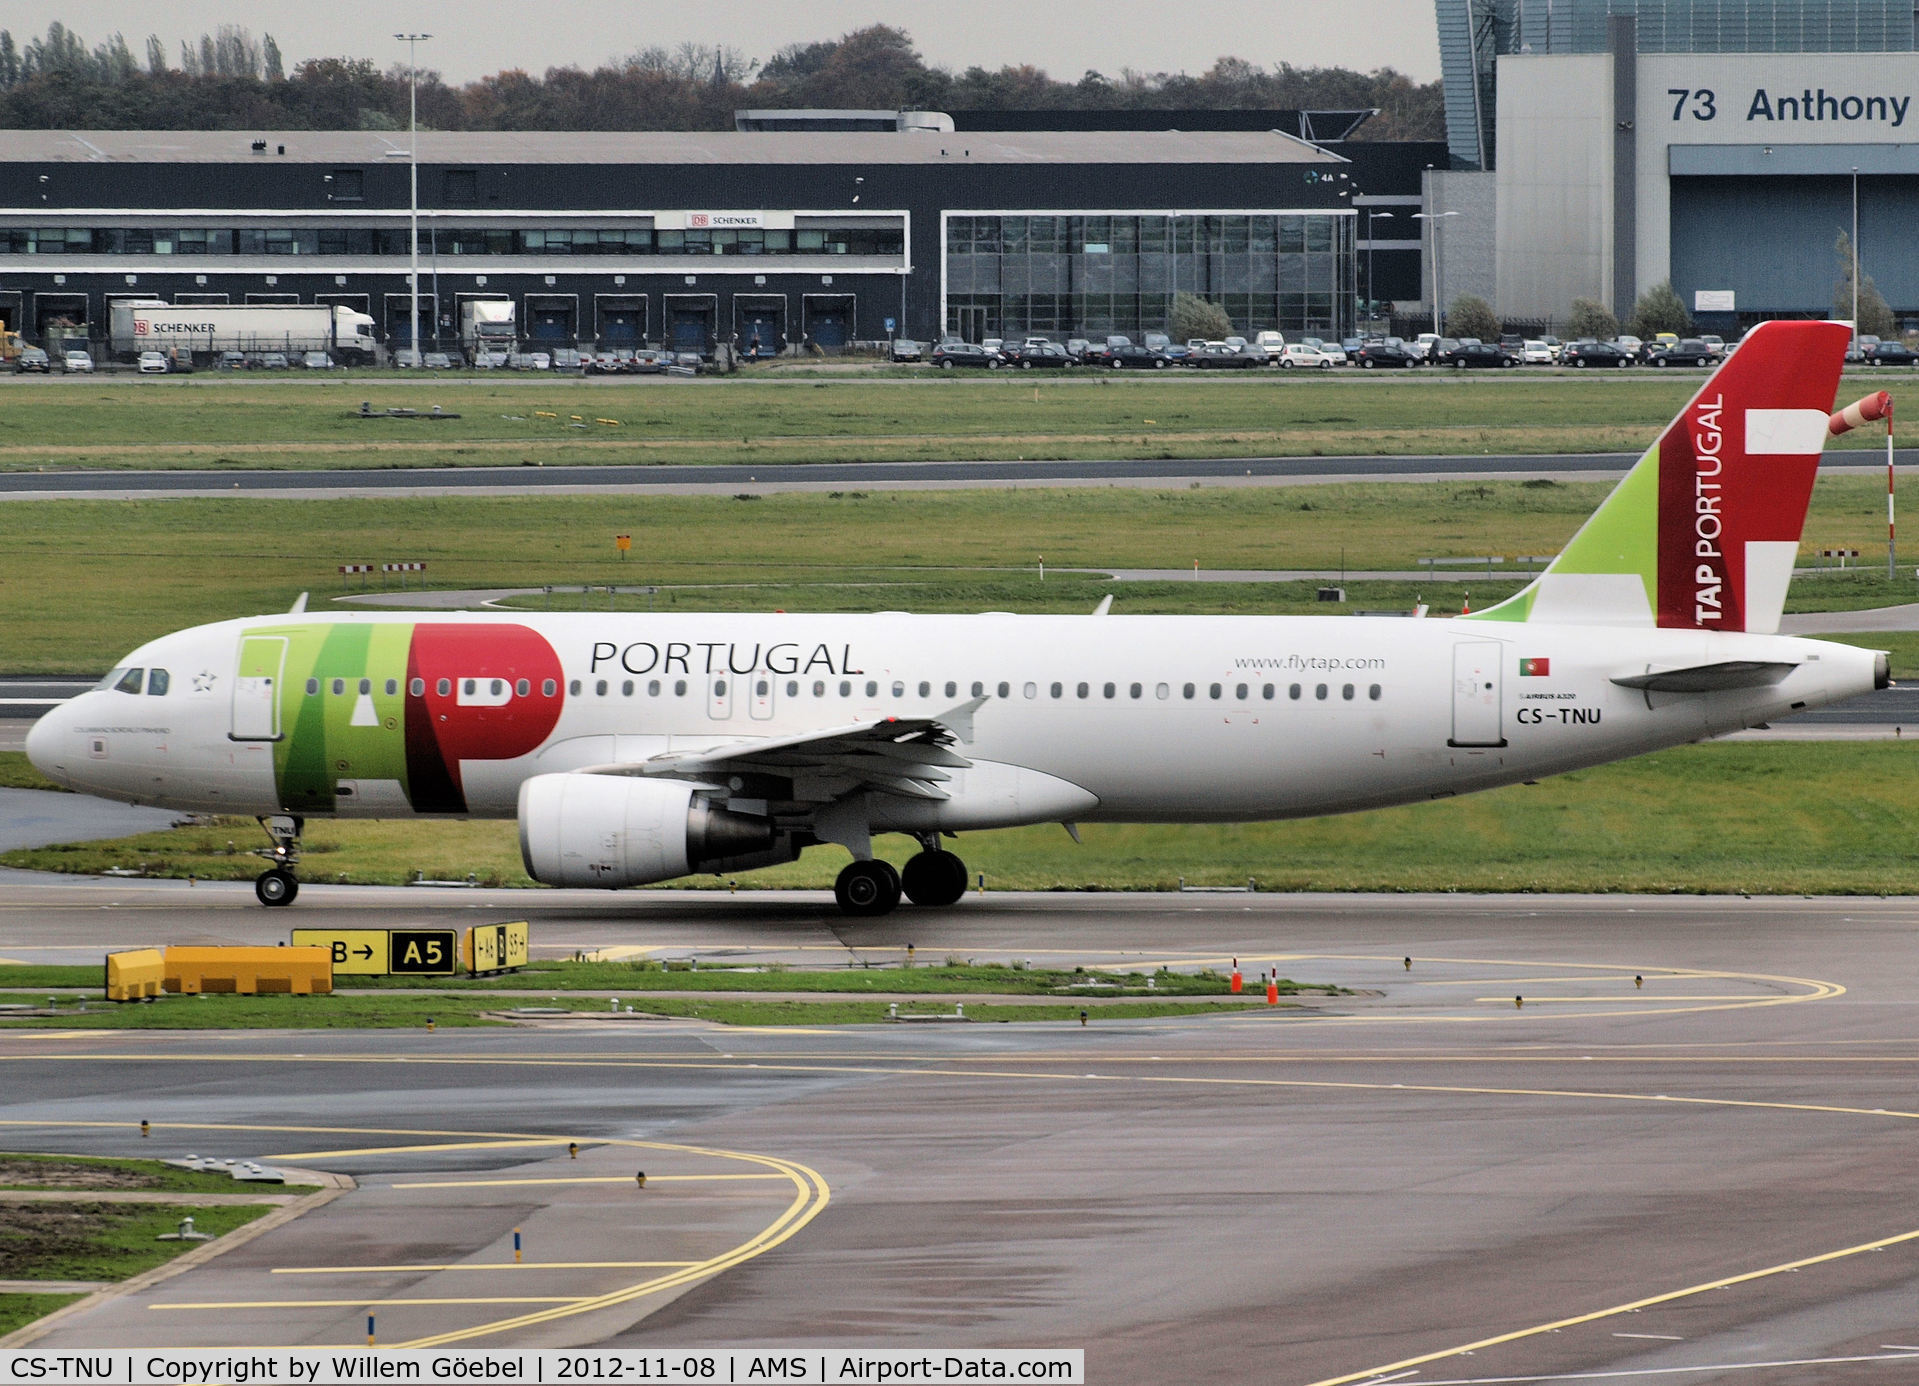 CS-TNU, 2009 Airbus A320-214 C/N 4106, Taxi to runway L18 of Schiphol Airport